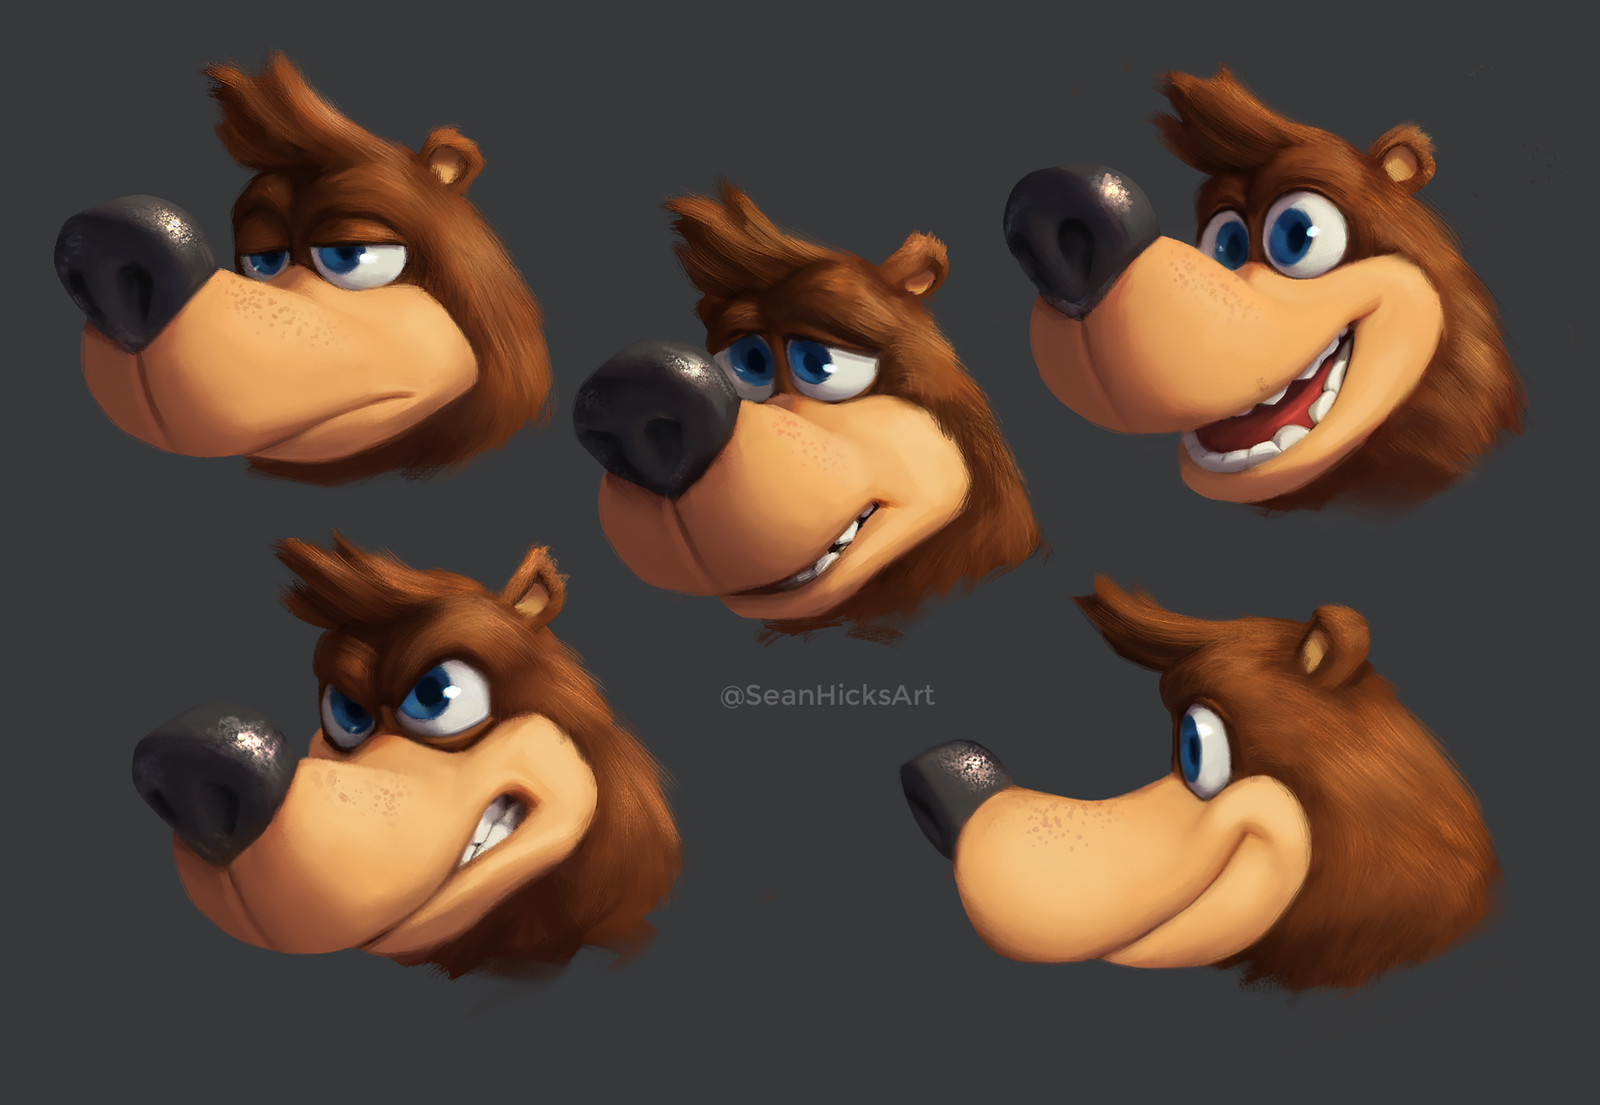 Exploring expressions and overall head shape